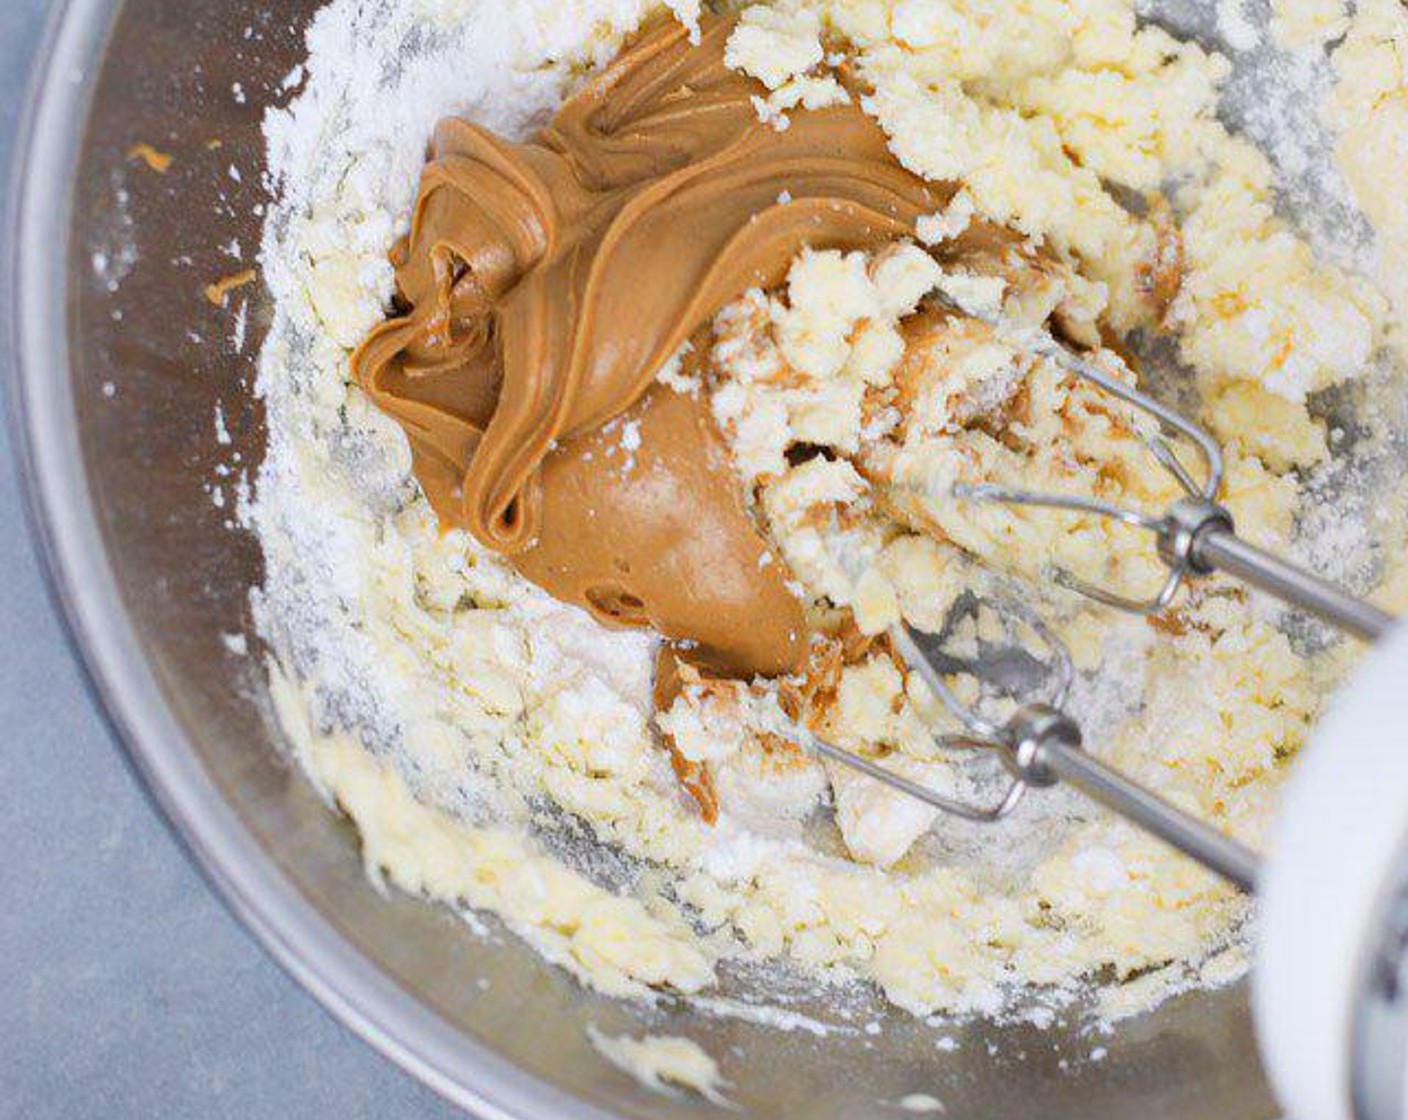 step 1 Whip Margarine (1/2 cup) and Butter (1/2 cup) in a large bowl. Mix in Peanut Butter (2 cups) and Powdered Confectioners Sugar (4 cups) until well combined. Mix in Marshmallow (1 cup).